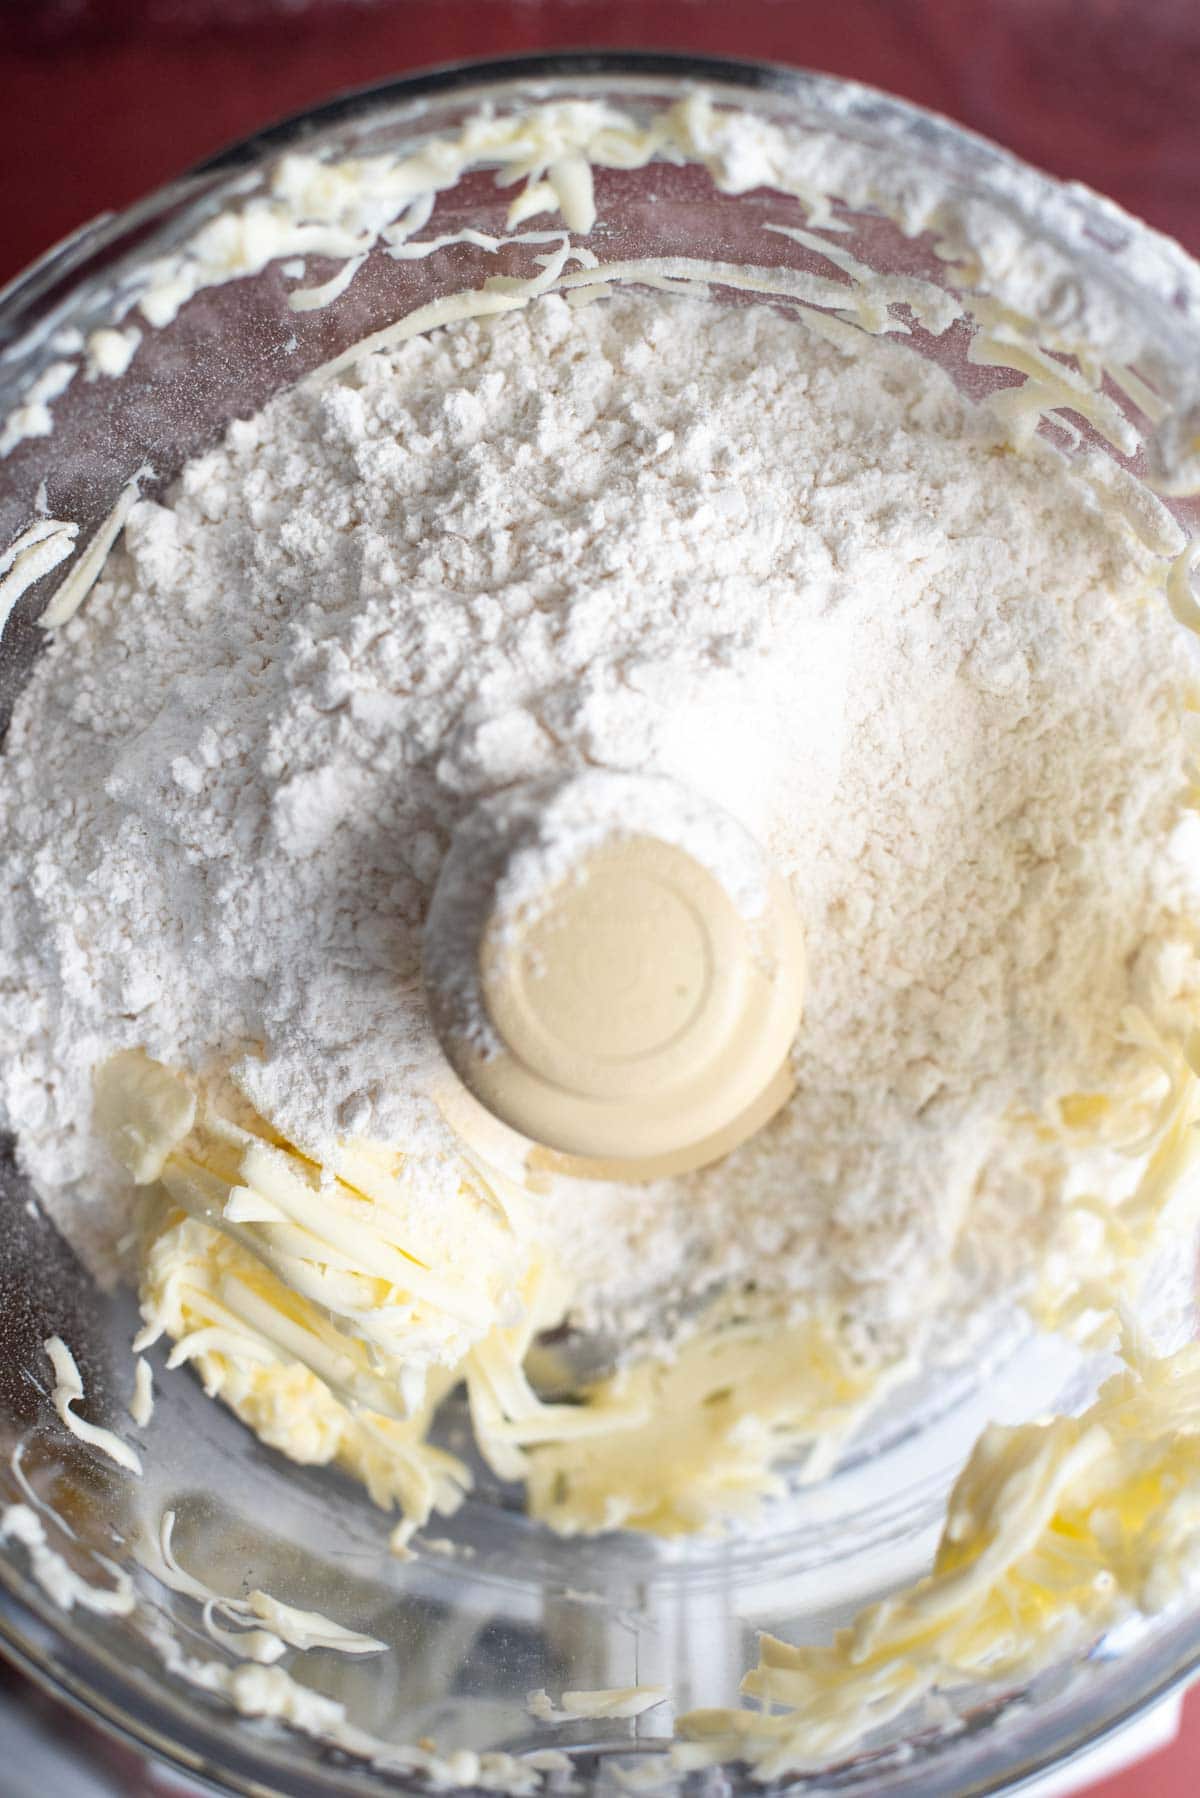 Add the flour to the grated butter.